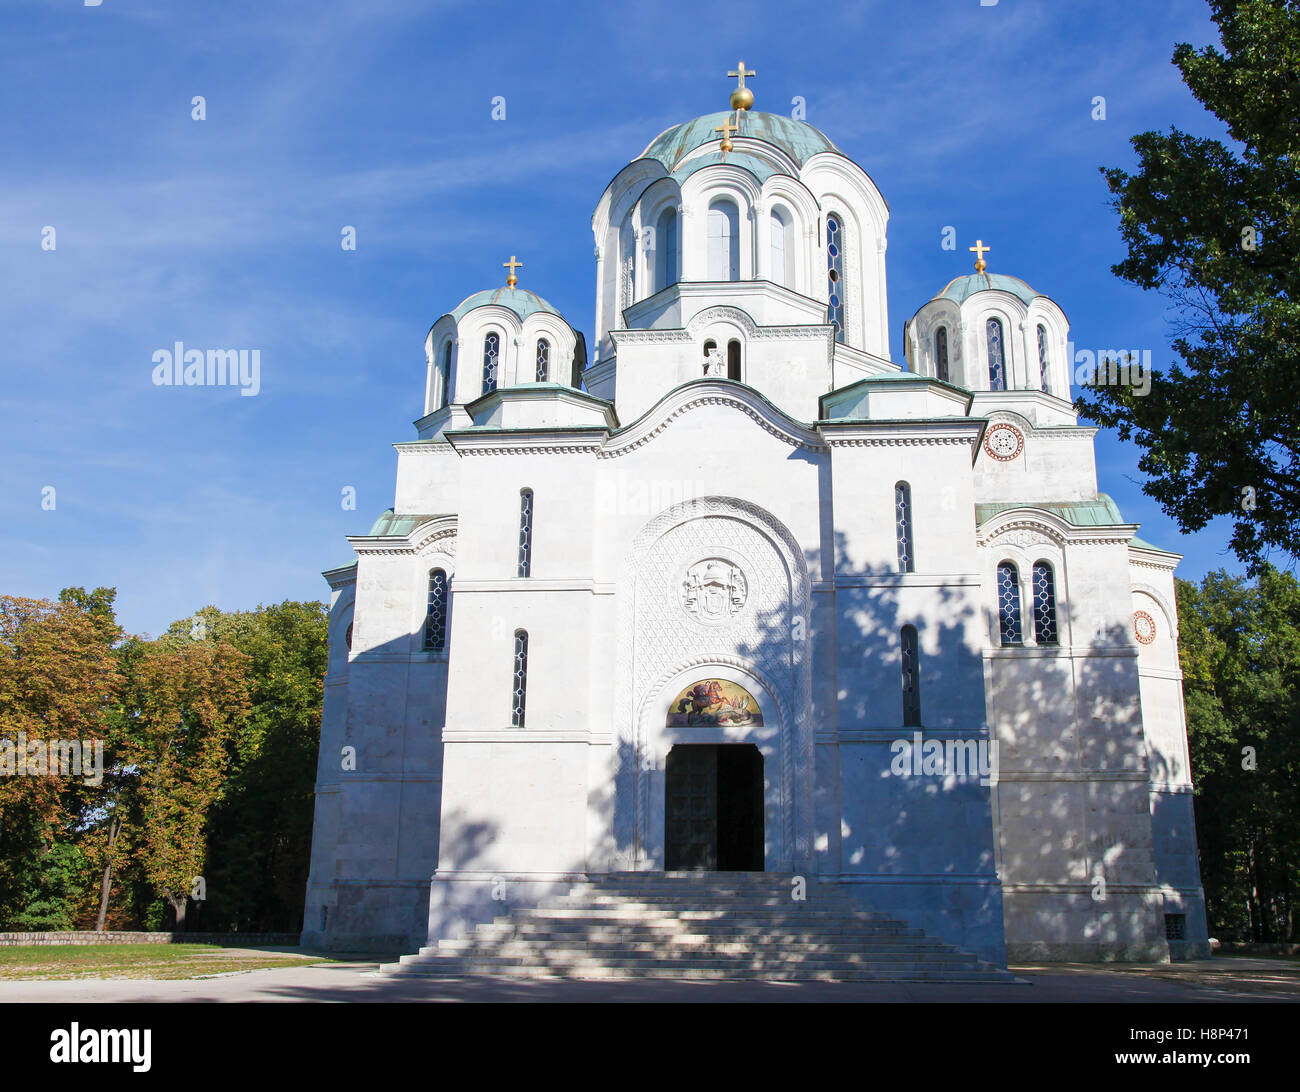 The Church of Saint Sava is a Serbian Orthodox church located on the Vracar plateau in Belgrade. It is one of the largest Orthod Stock Photo